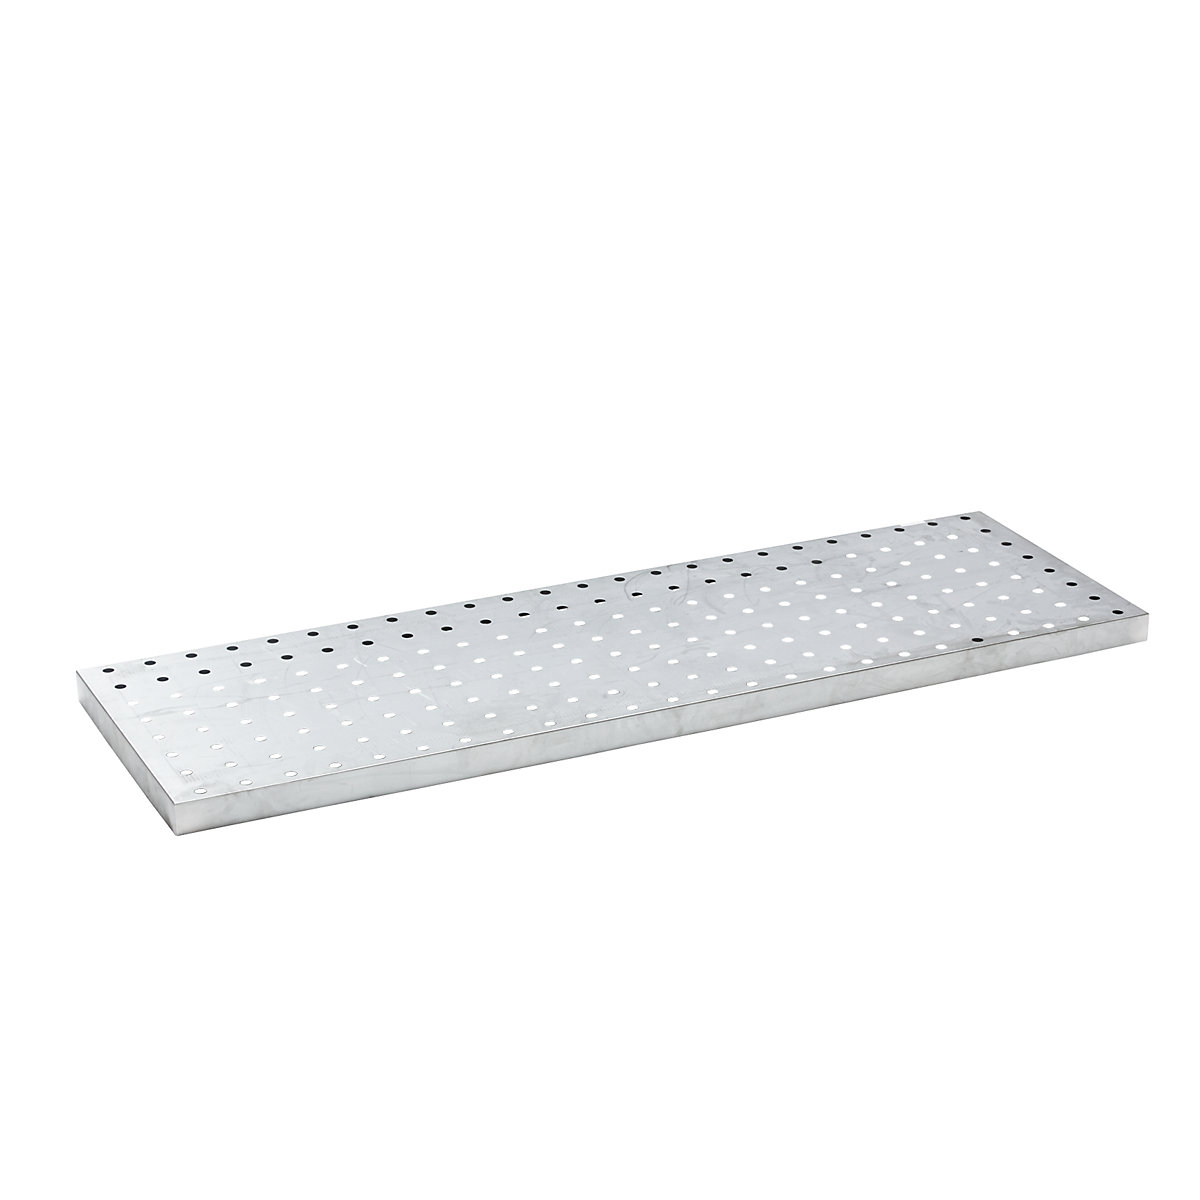 Perforated sheet metal grate – eurokraft basic, zinc plated, for LxWxH 1850 x 600 x 60 mm-3